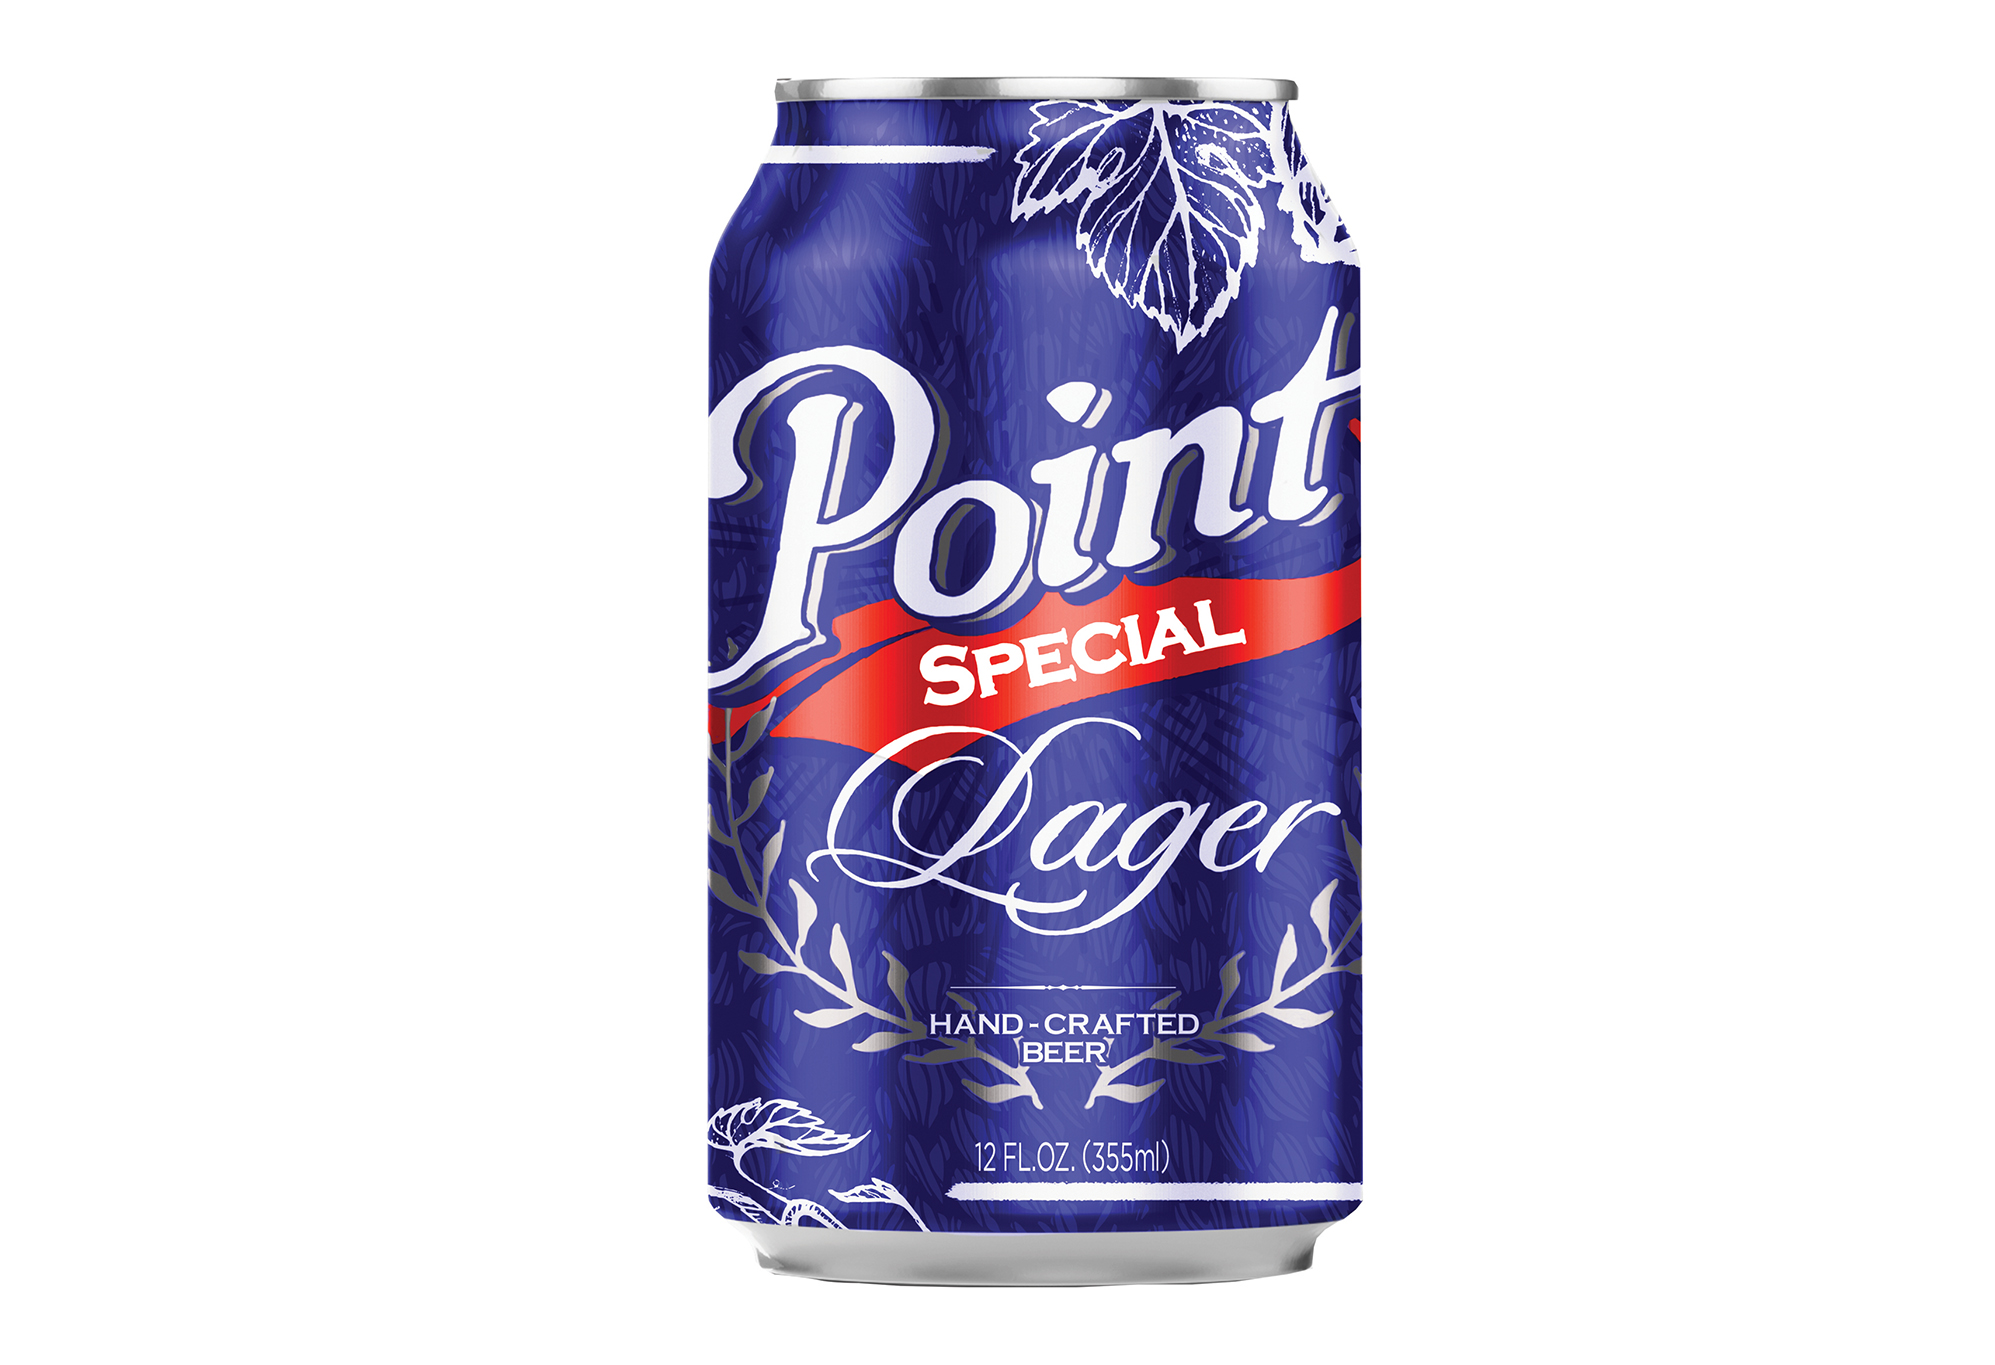 Stevens Point Brewery's Special Lager